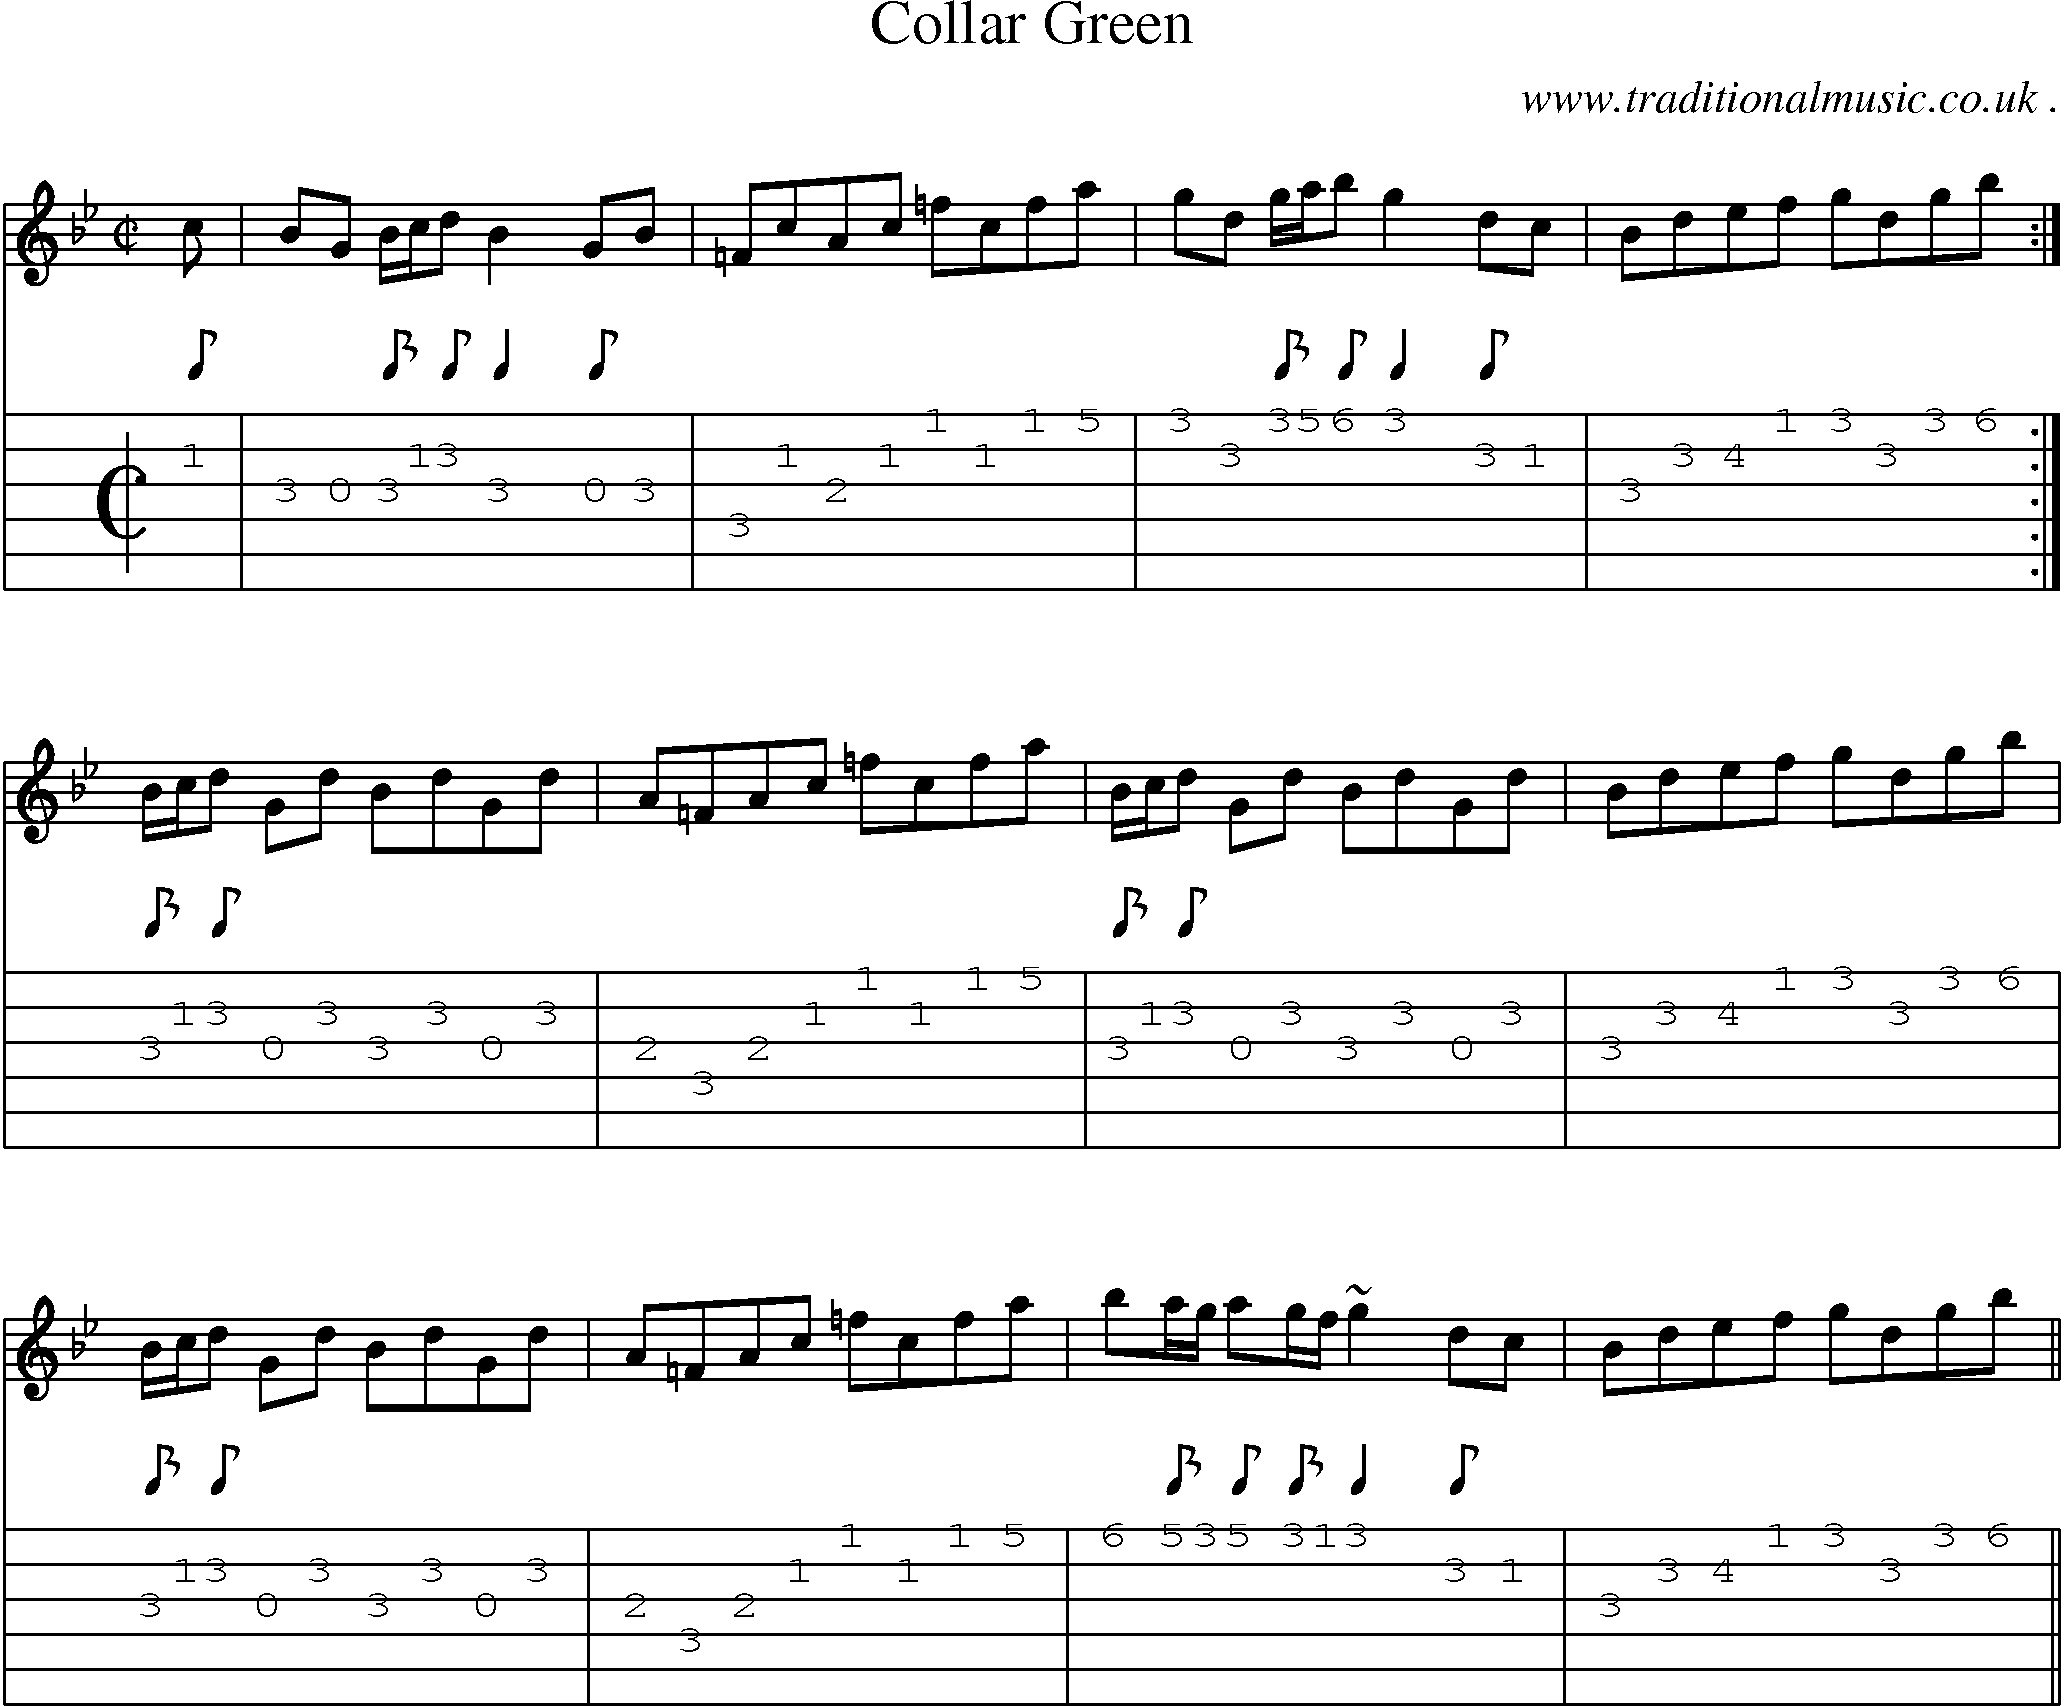 Sheet-music  score, Chords and Guitar Tabs for Collar Green